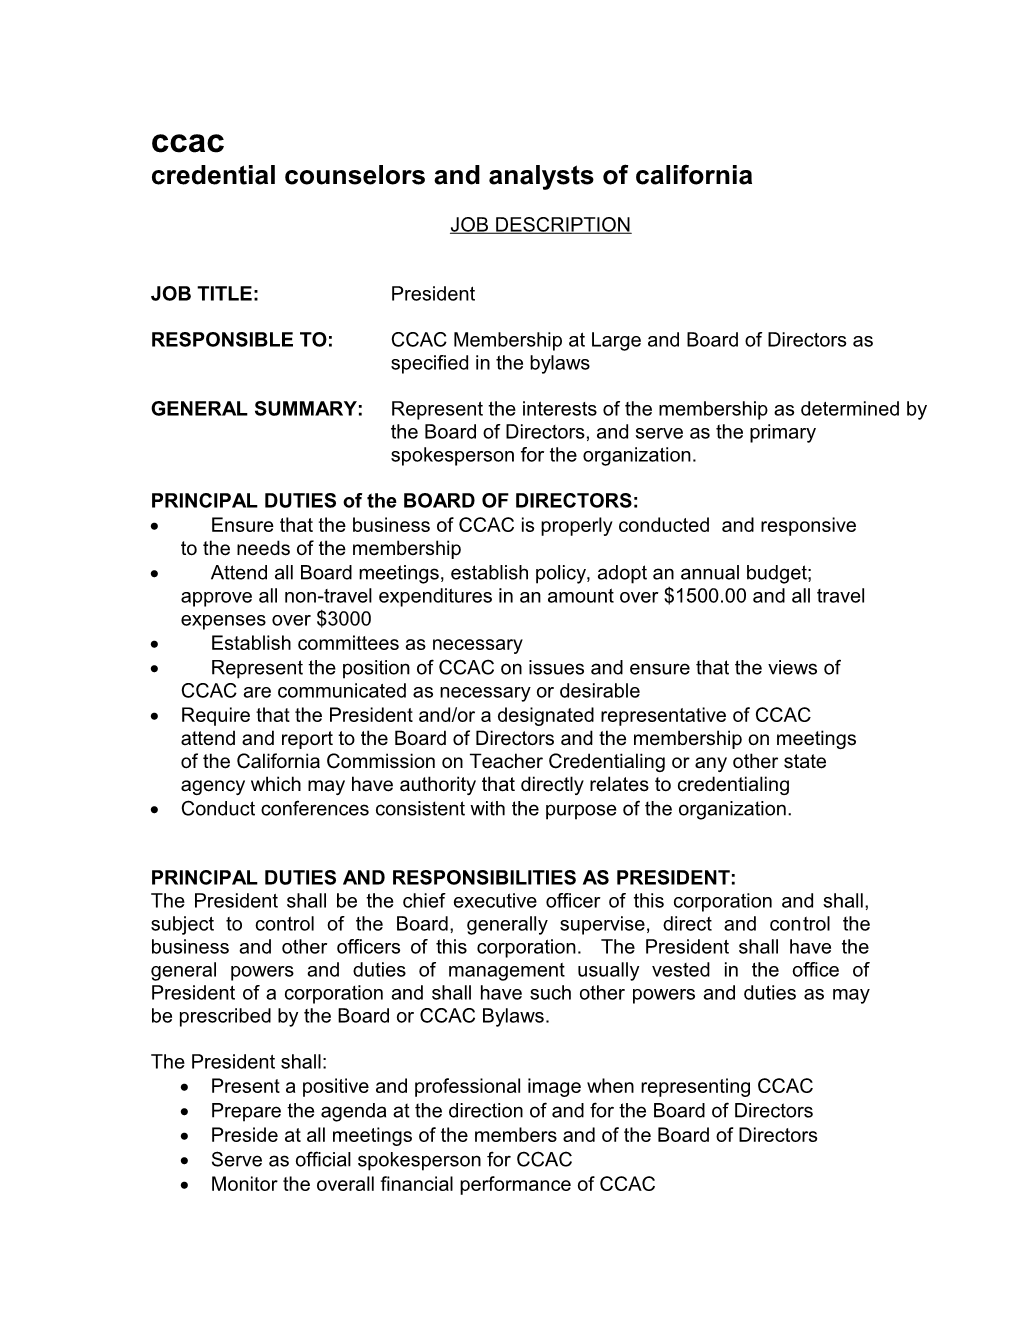 Credential Counselors and Analysts of California